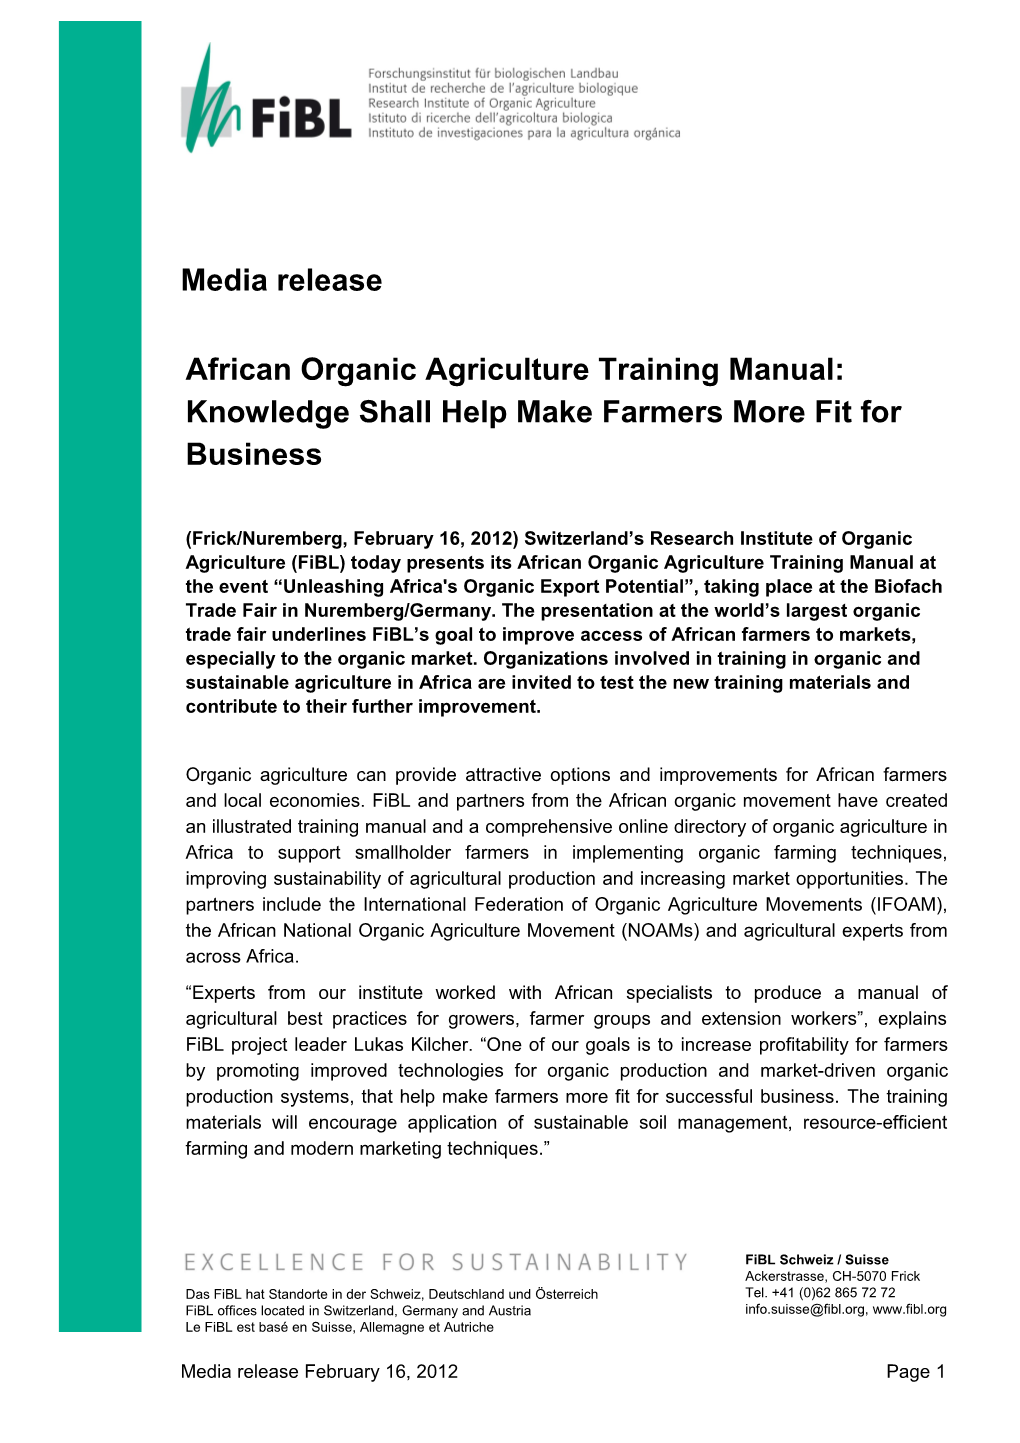 African Organic Agriculture Training Manual: Knowledge Shall Help Make Farmers More Fit